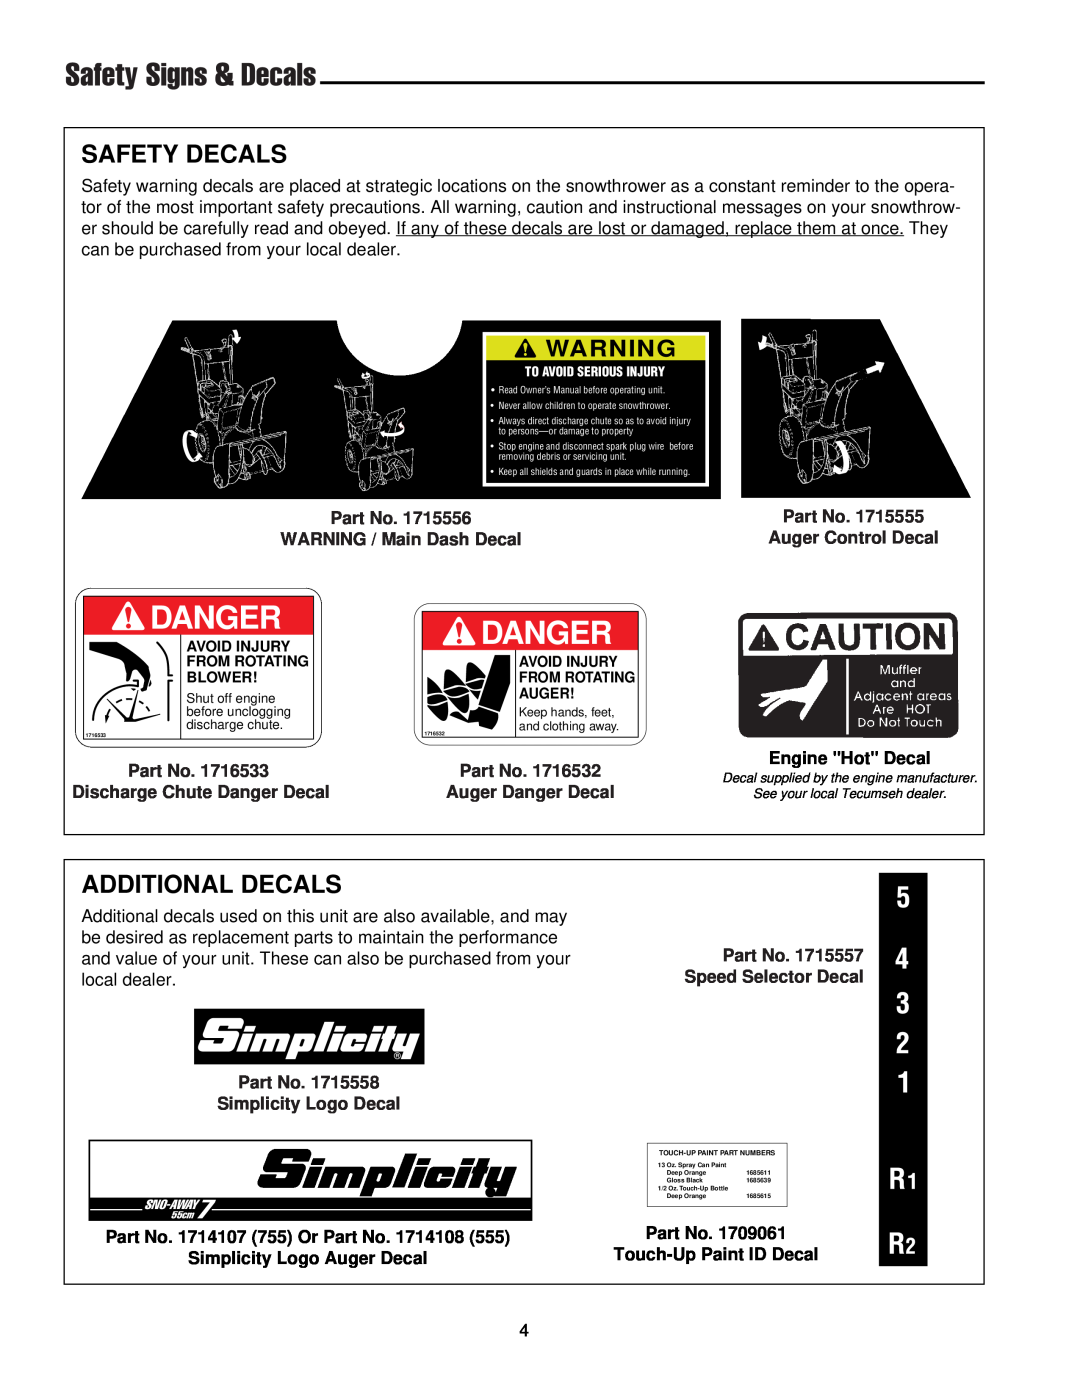 Simplicity 1693164 755M manual Safety Signs & Decals, Safety Decals, Additional Decals, Danger, WARNING / Main Dash Decal 